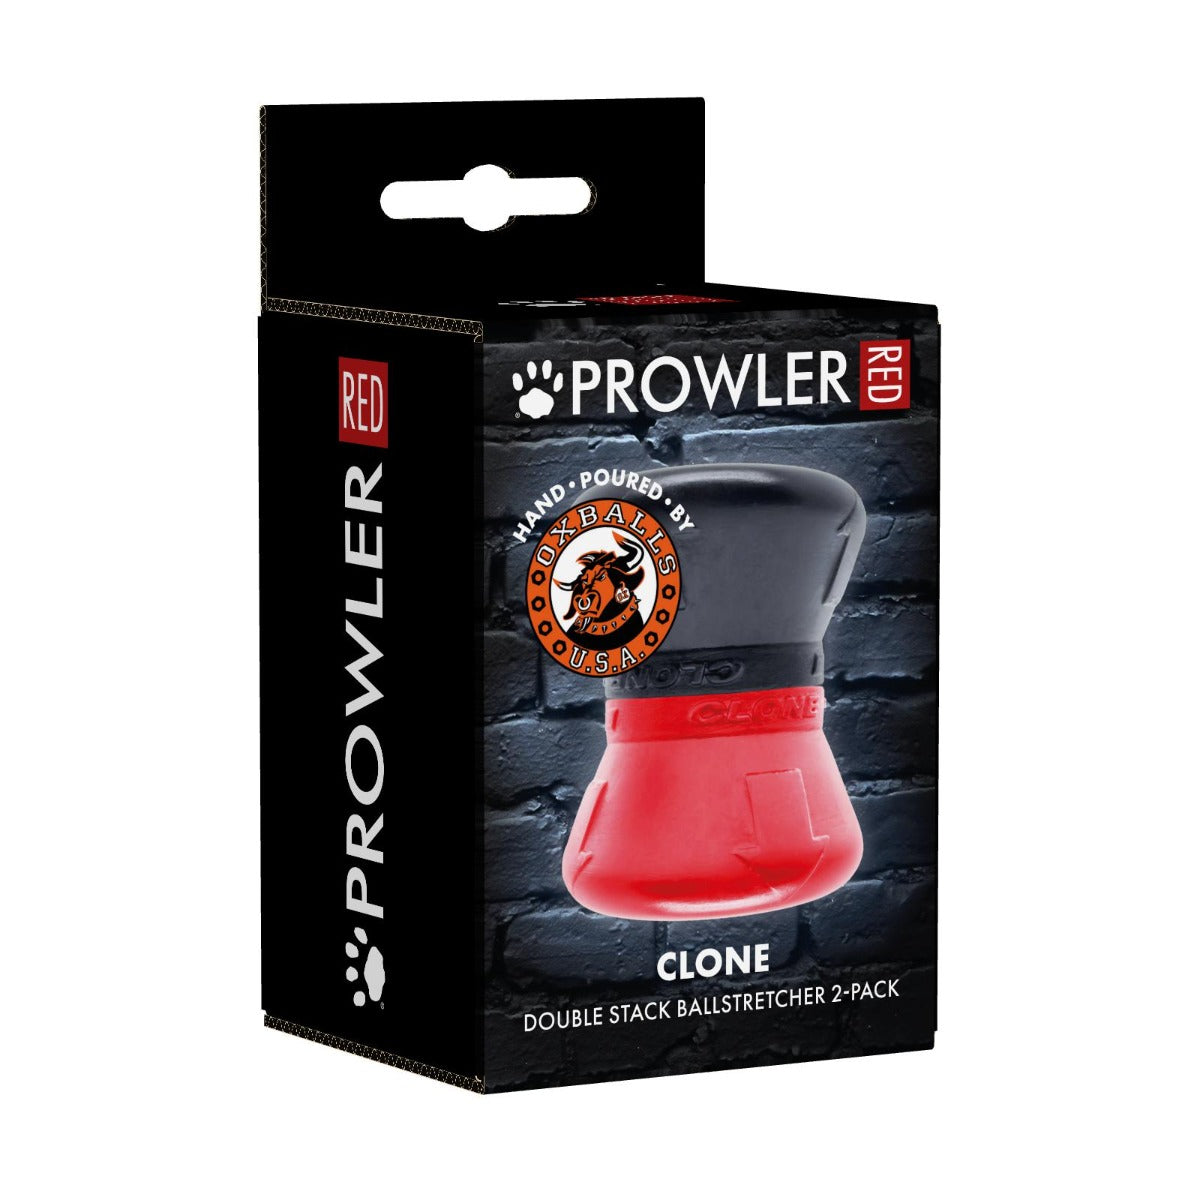 Prowler RED Clone By Oxballs (7020764987556)